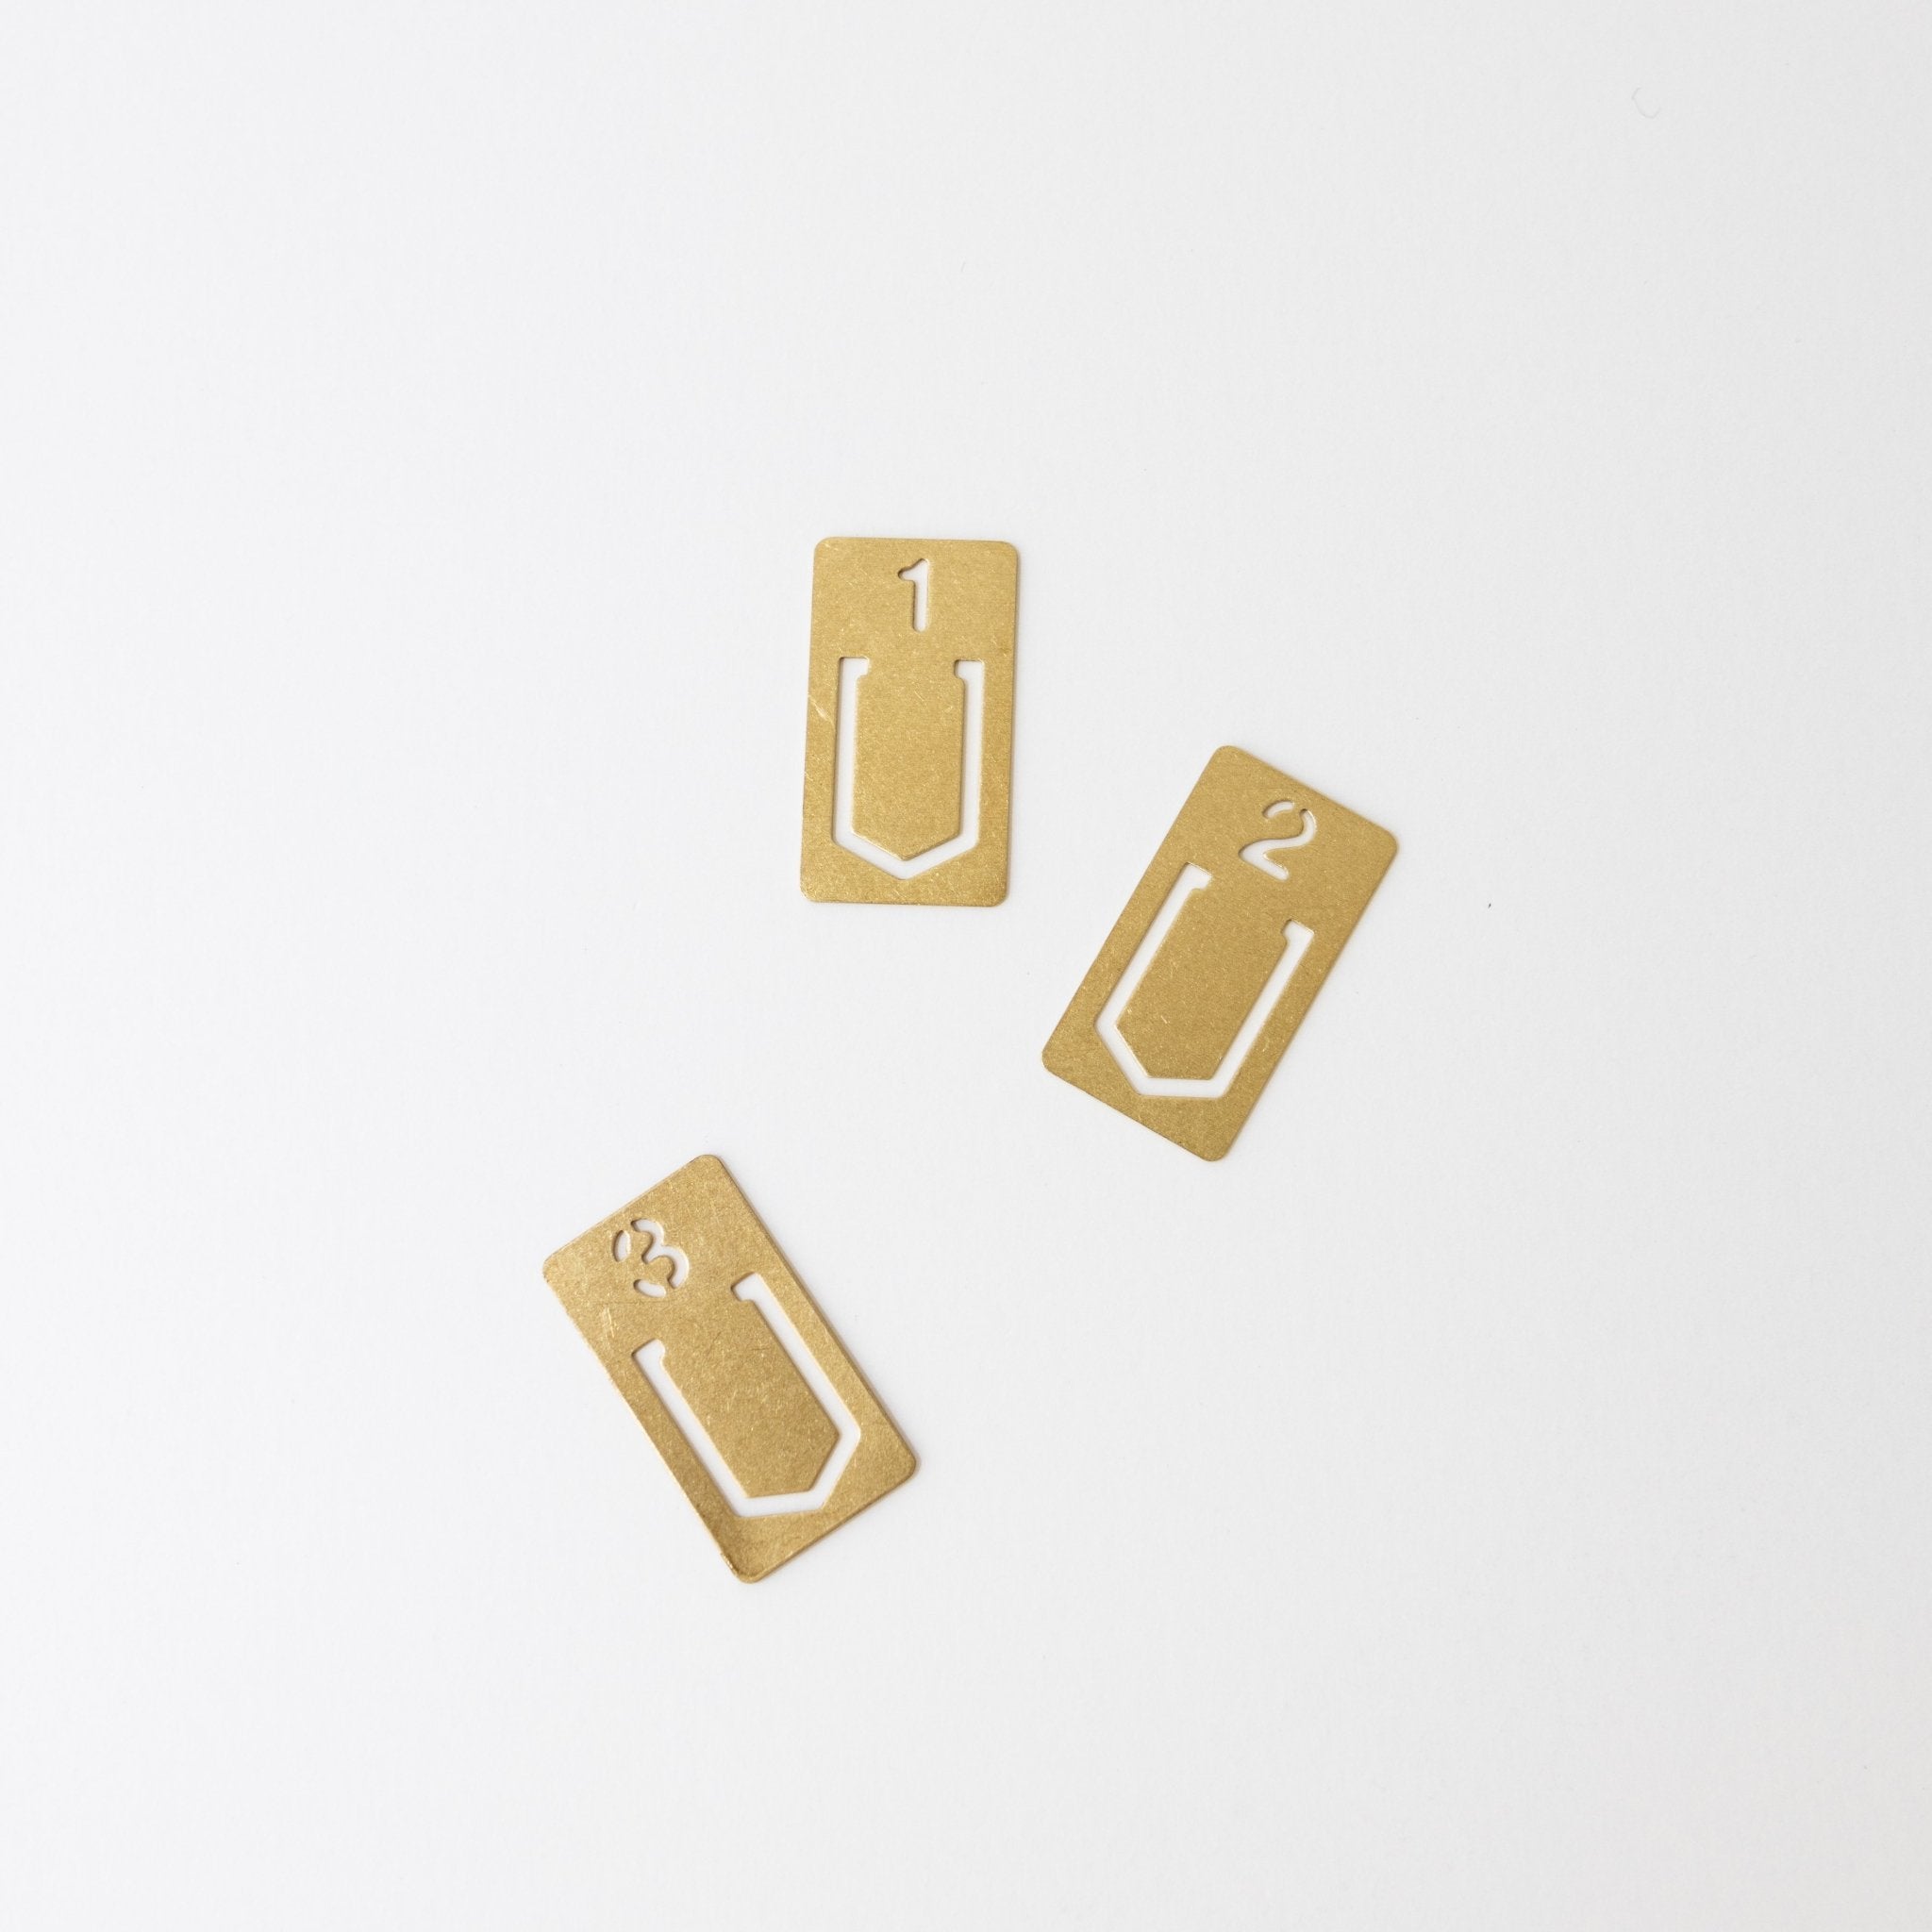 Traveler's Company Brass Number Clips - tortoise general store